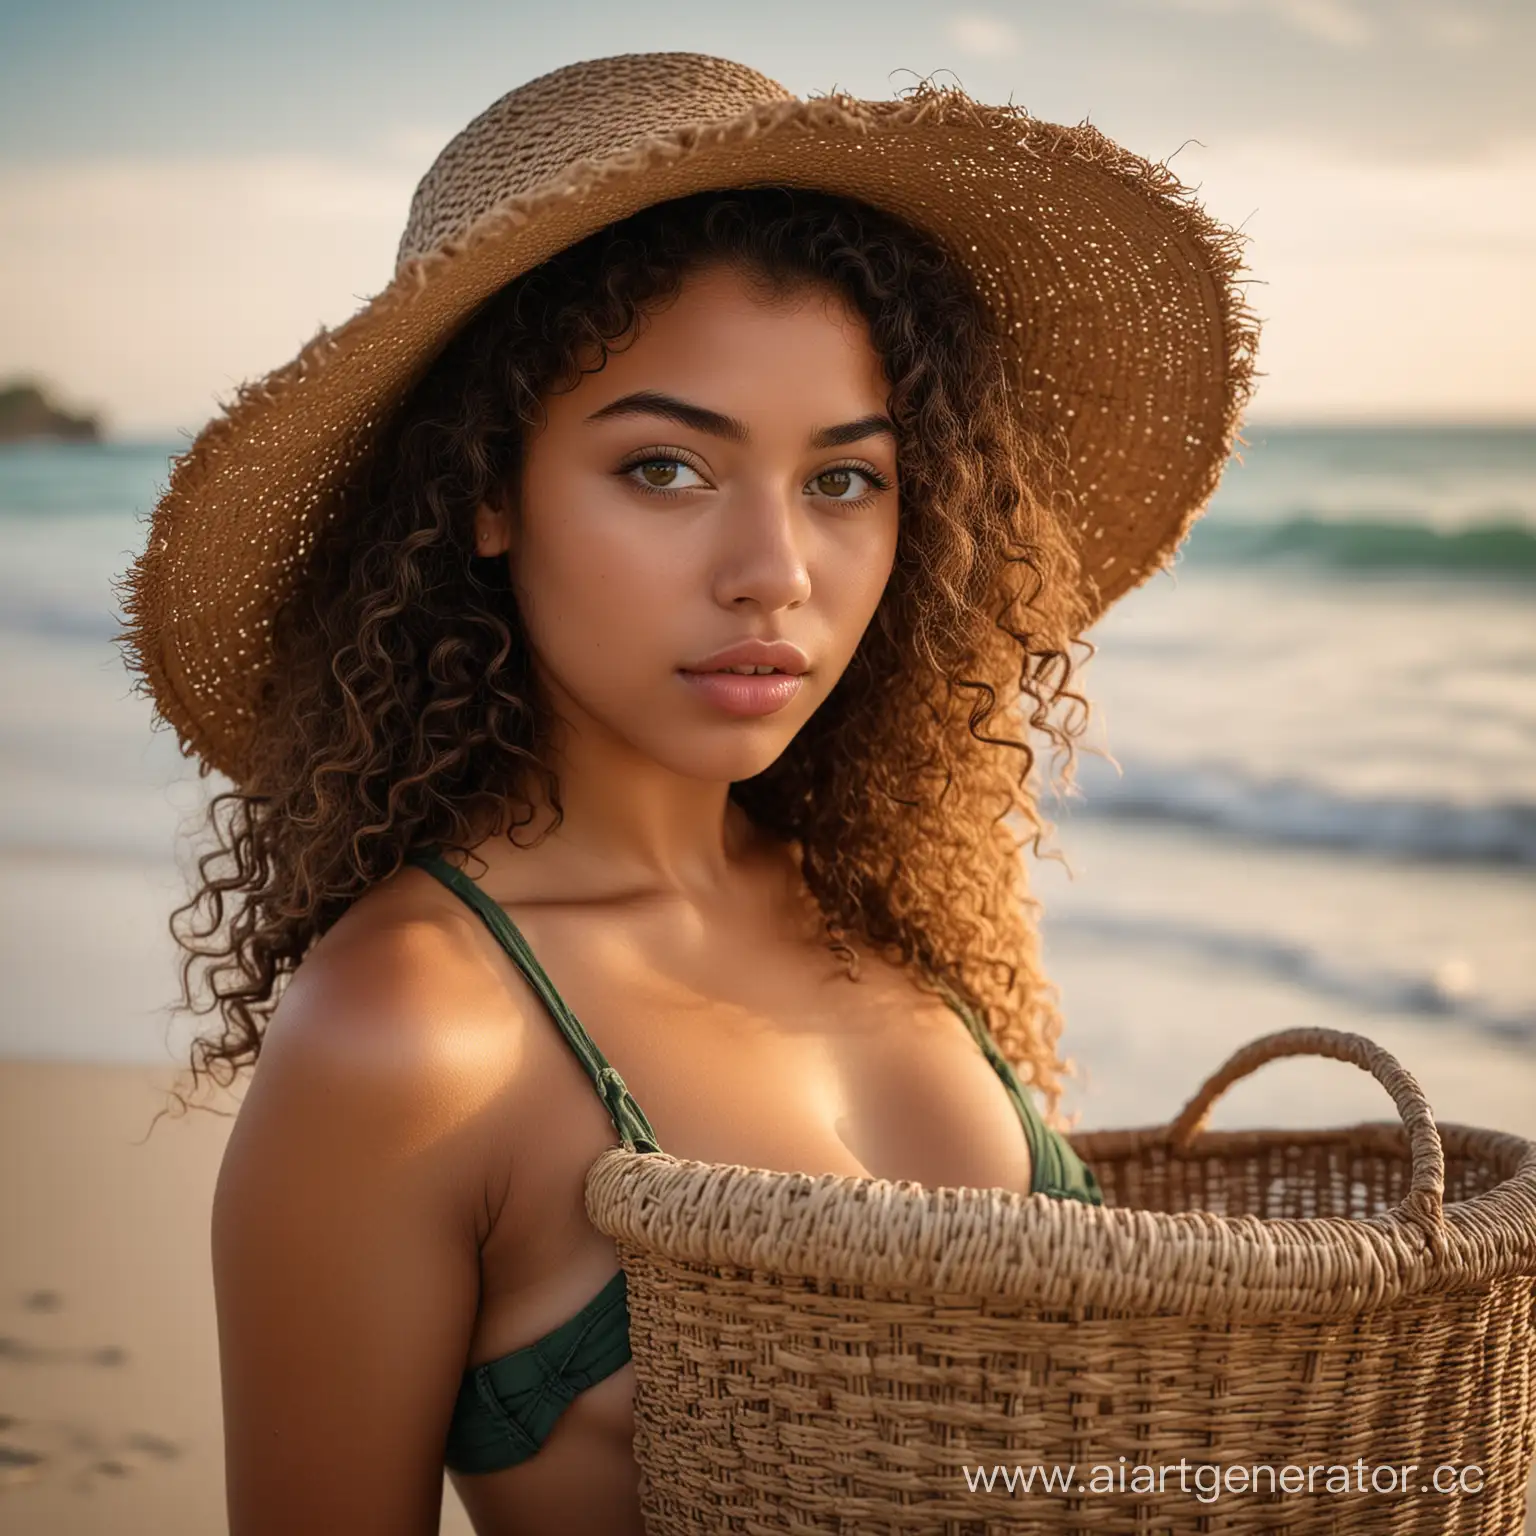 Stunning-18-Year-Old-Curvy-Brunette-Nude-on-Beach-with-Woven-Basket